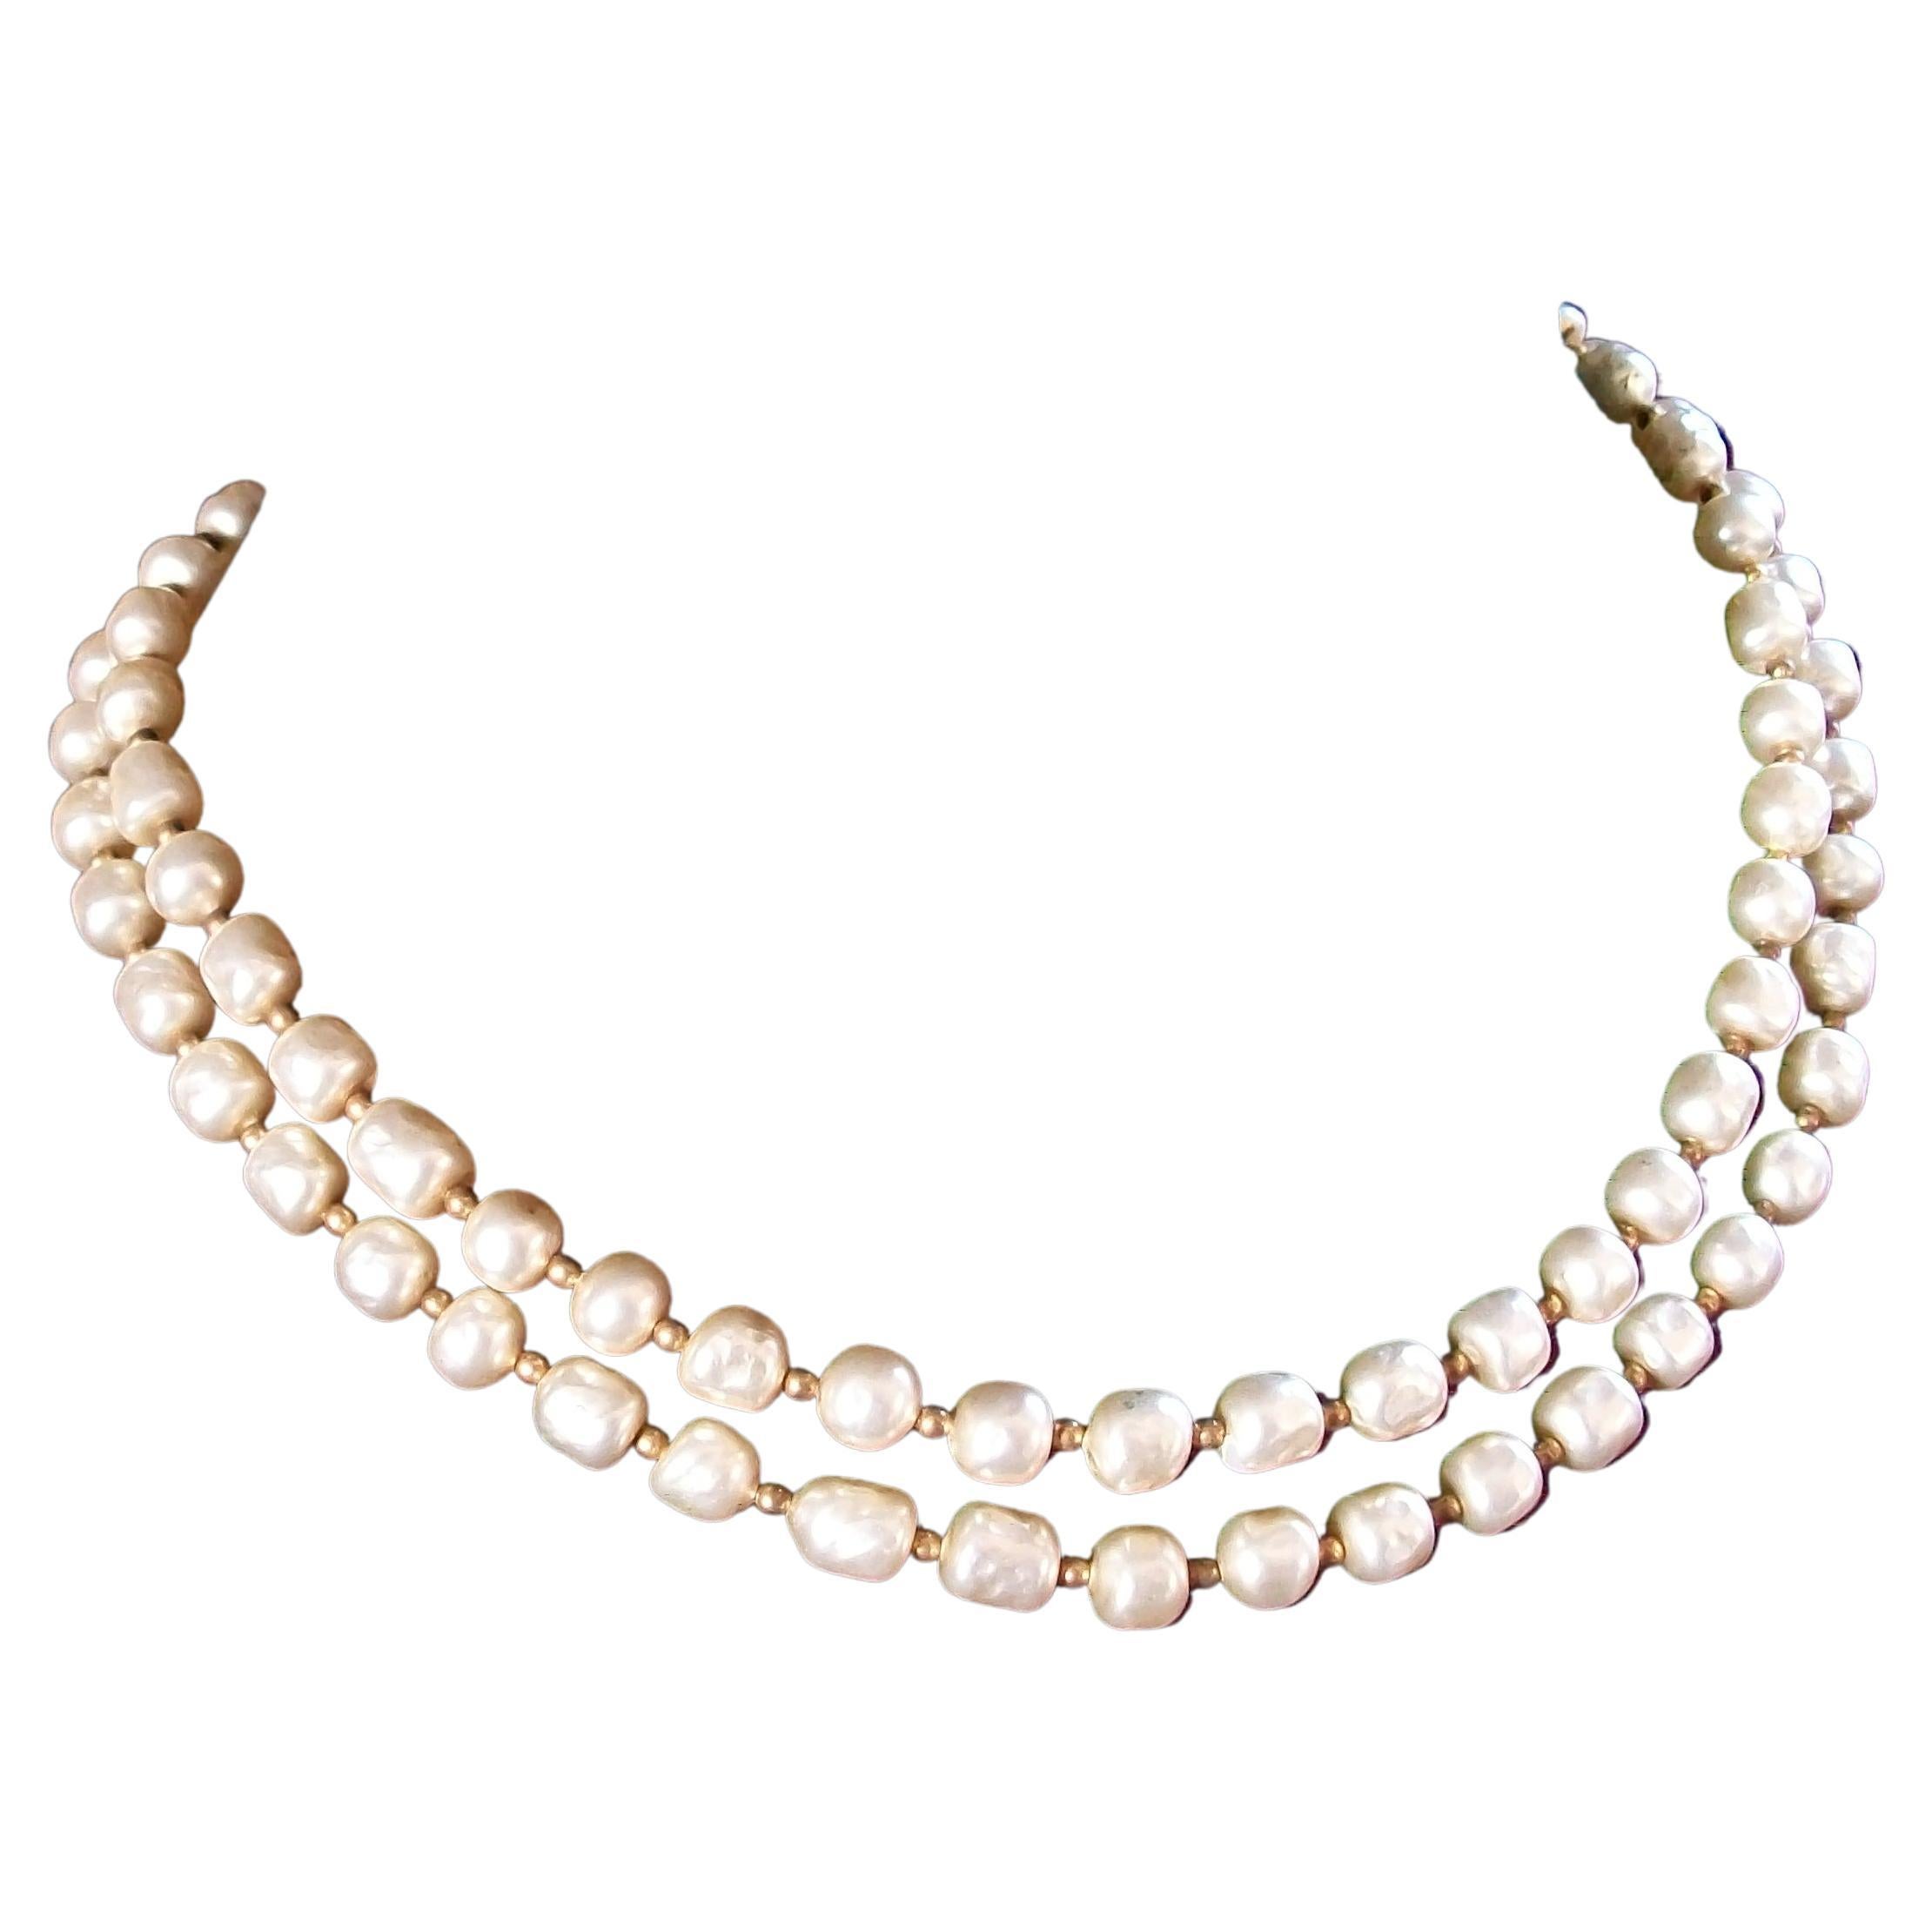 Miriam Haskell Style Faux Baroque Pearl & Bead Necklace, U.S, circa 1960s